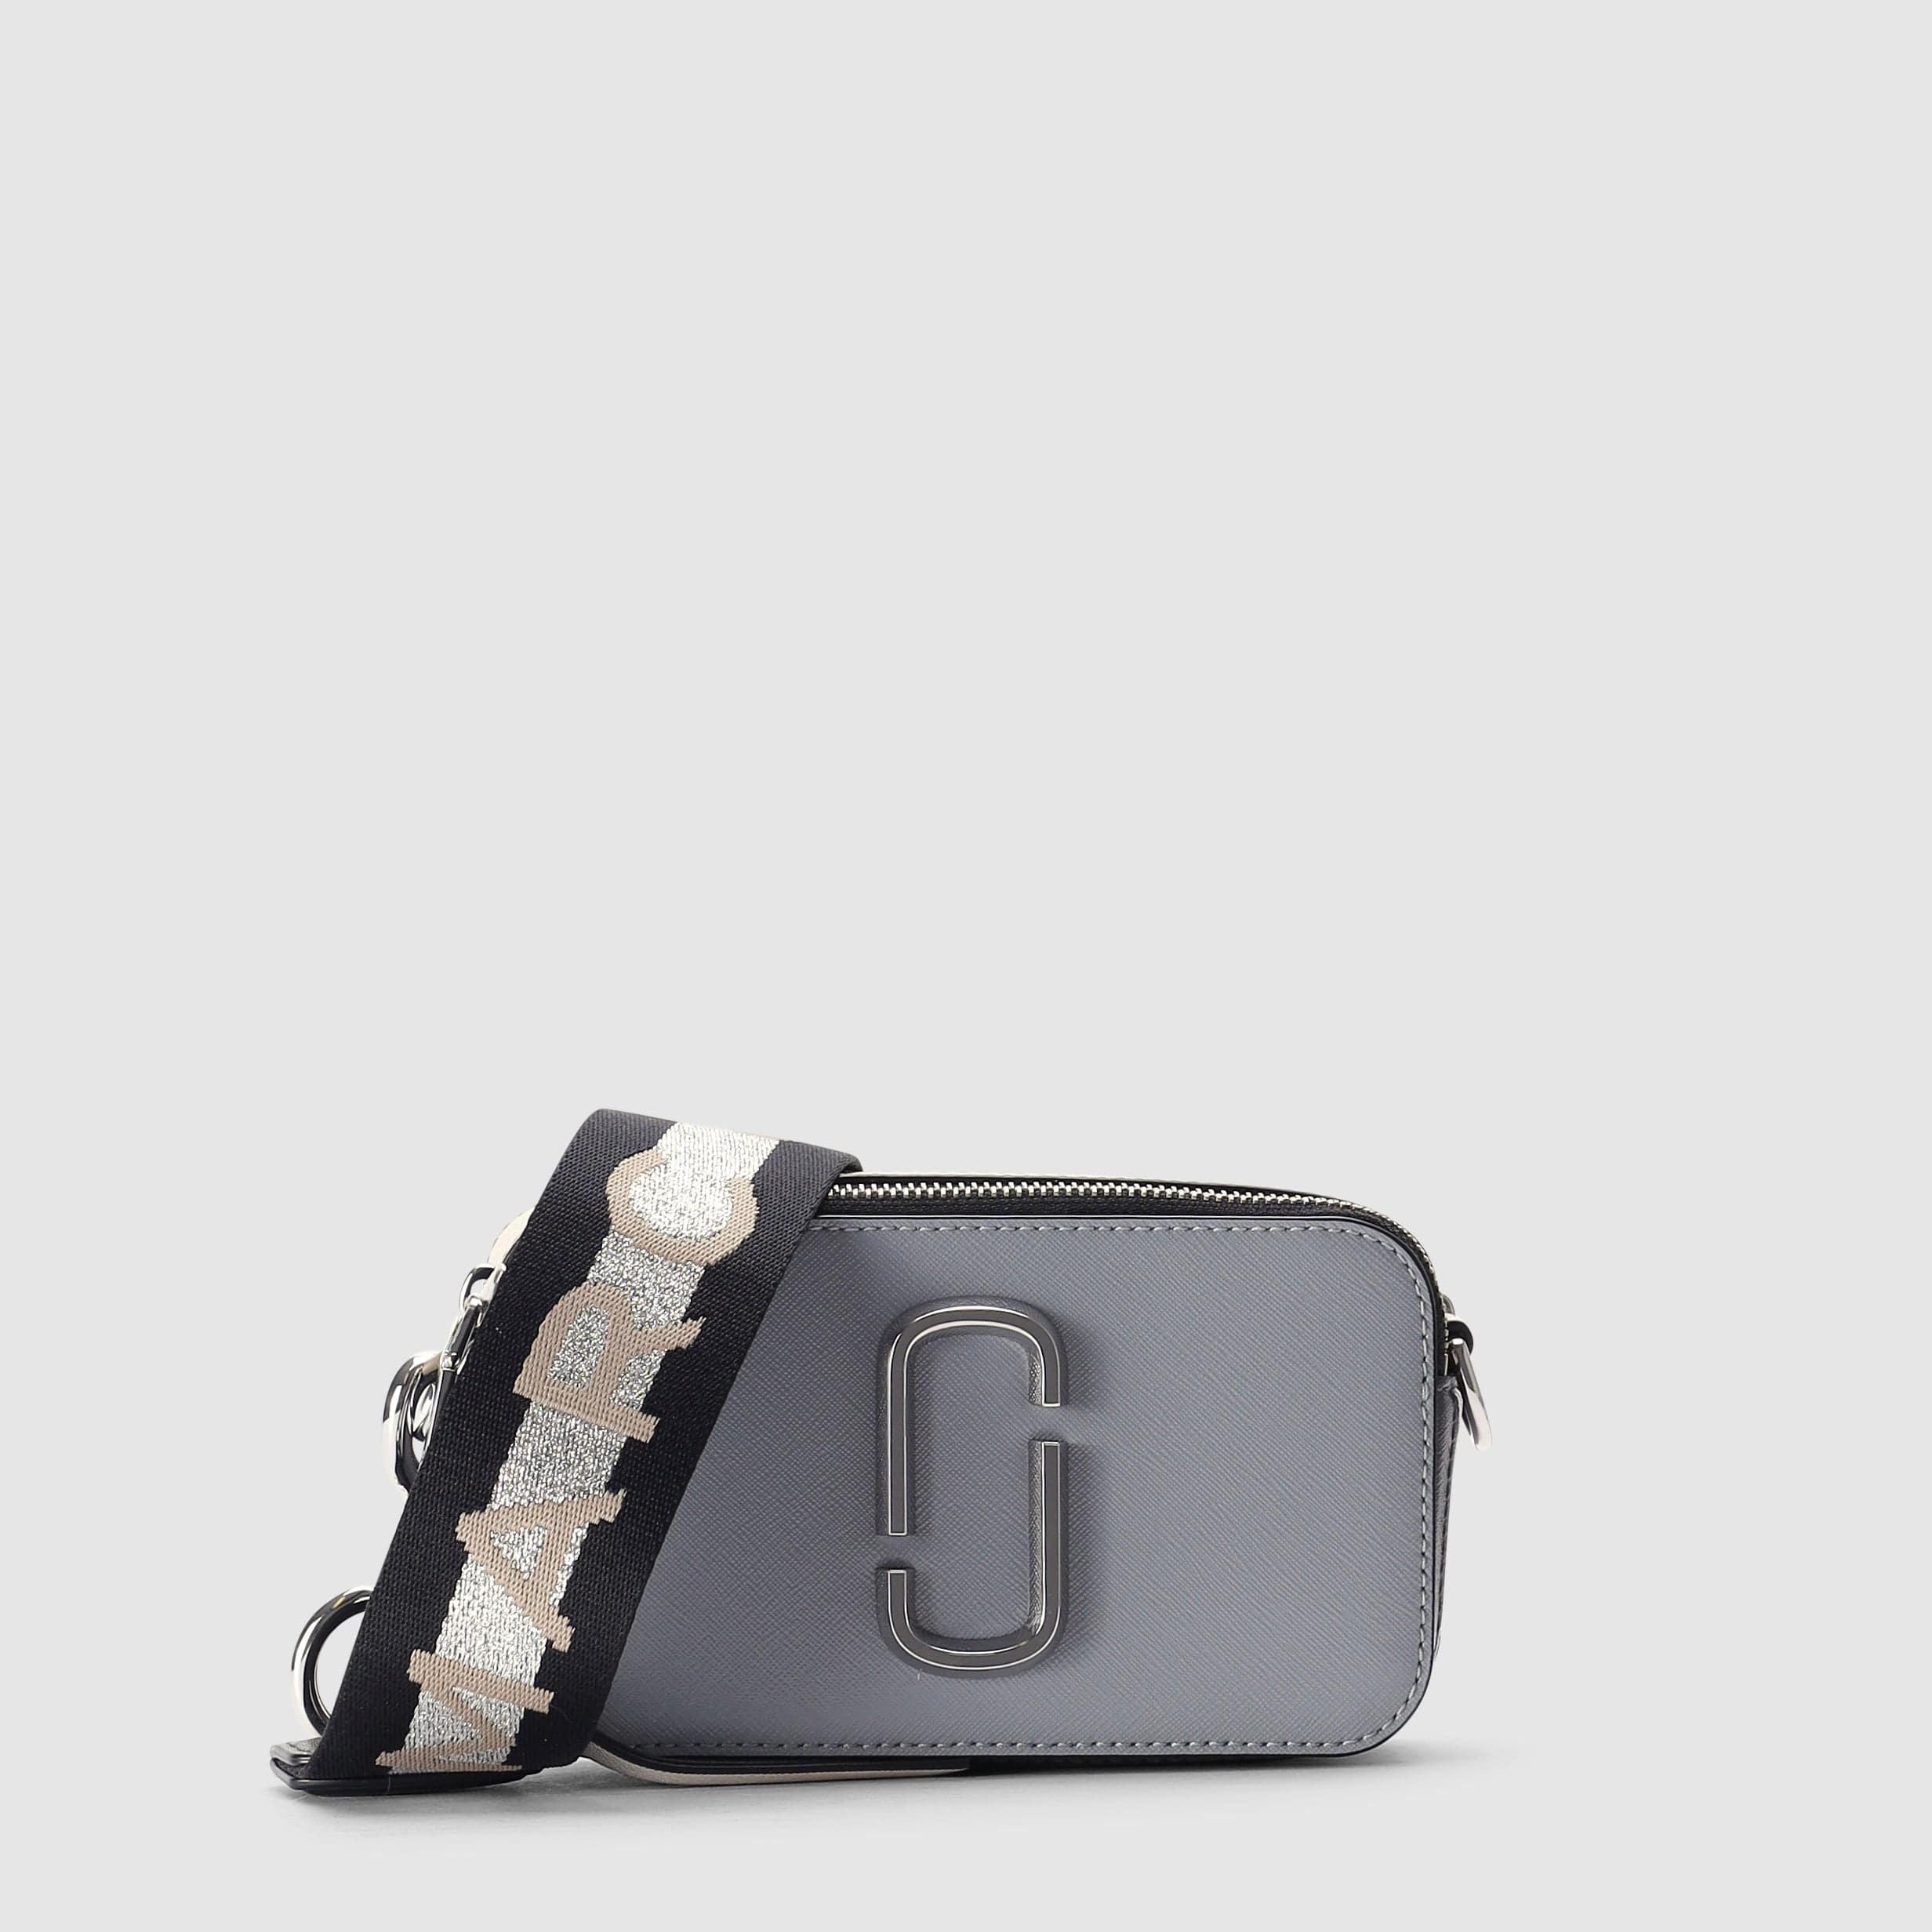 Marc Jacobs Snapshot Wolf Cross Body Bag in Gray | Lyst